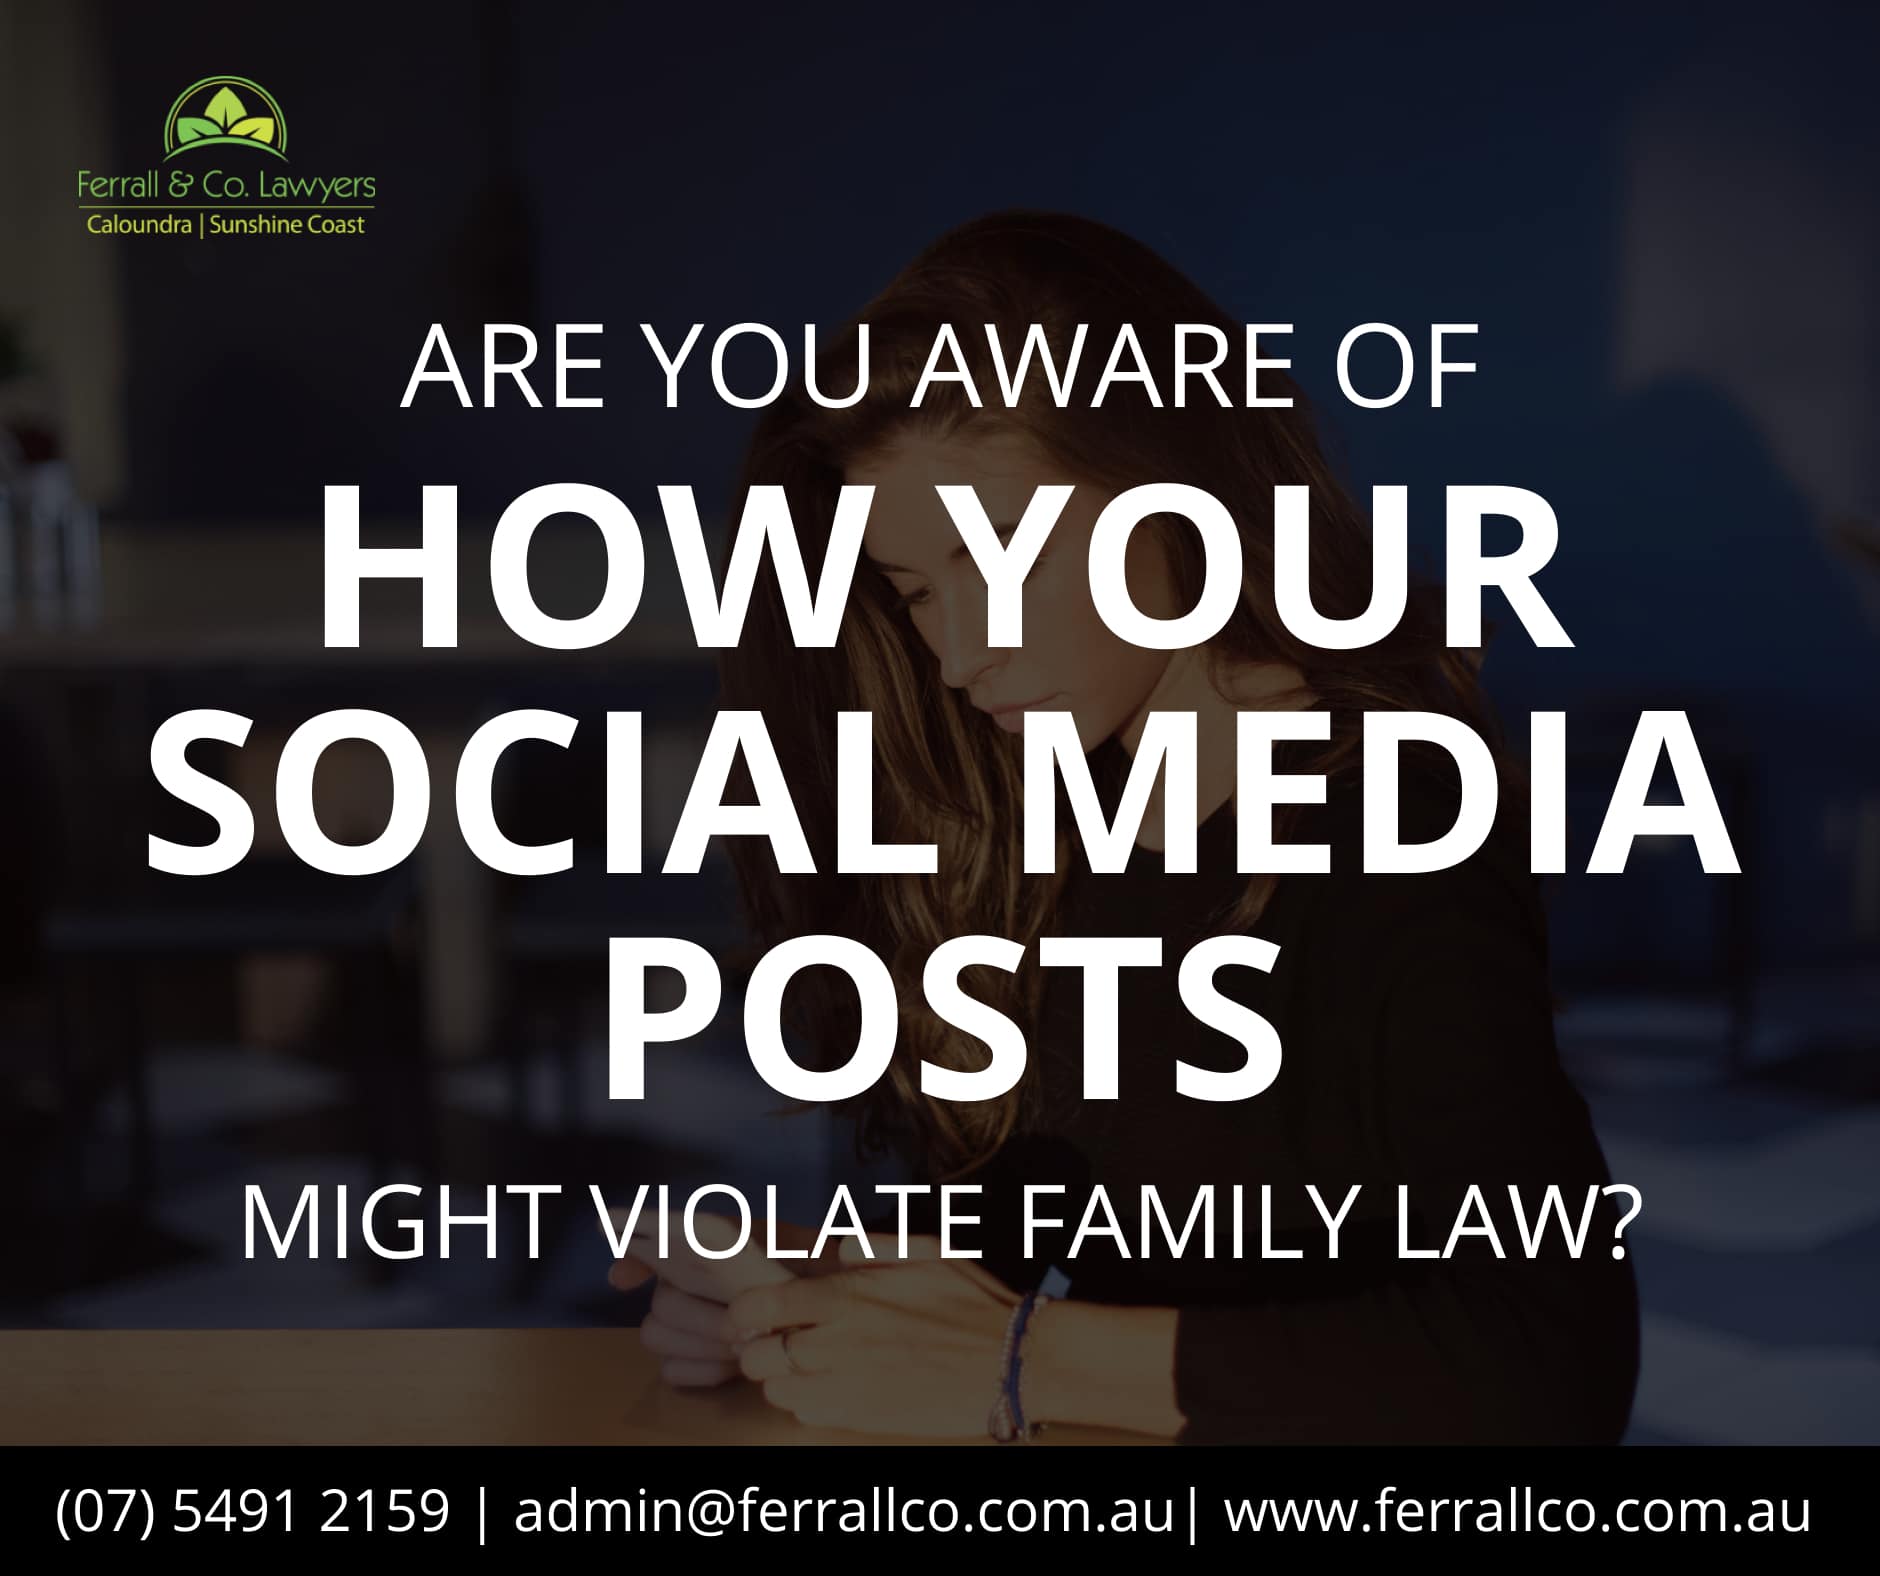 Are You Aware of How Your Social Media Posts Might Violate Family Law